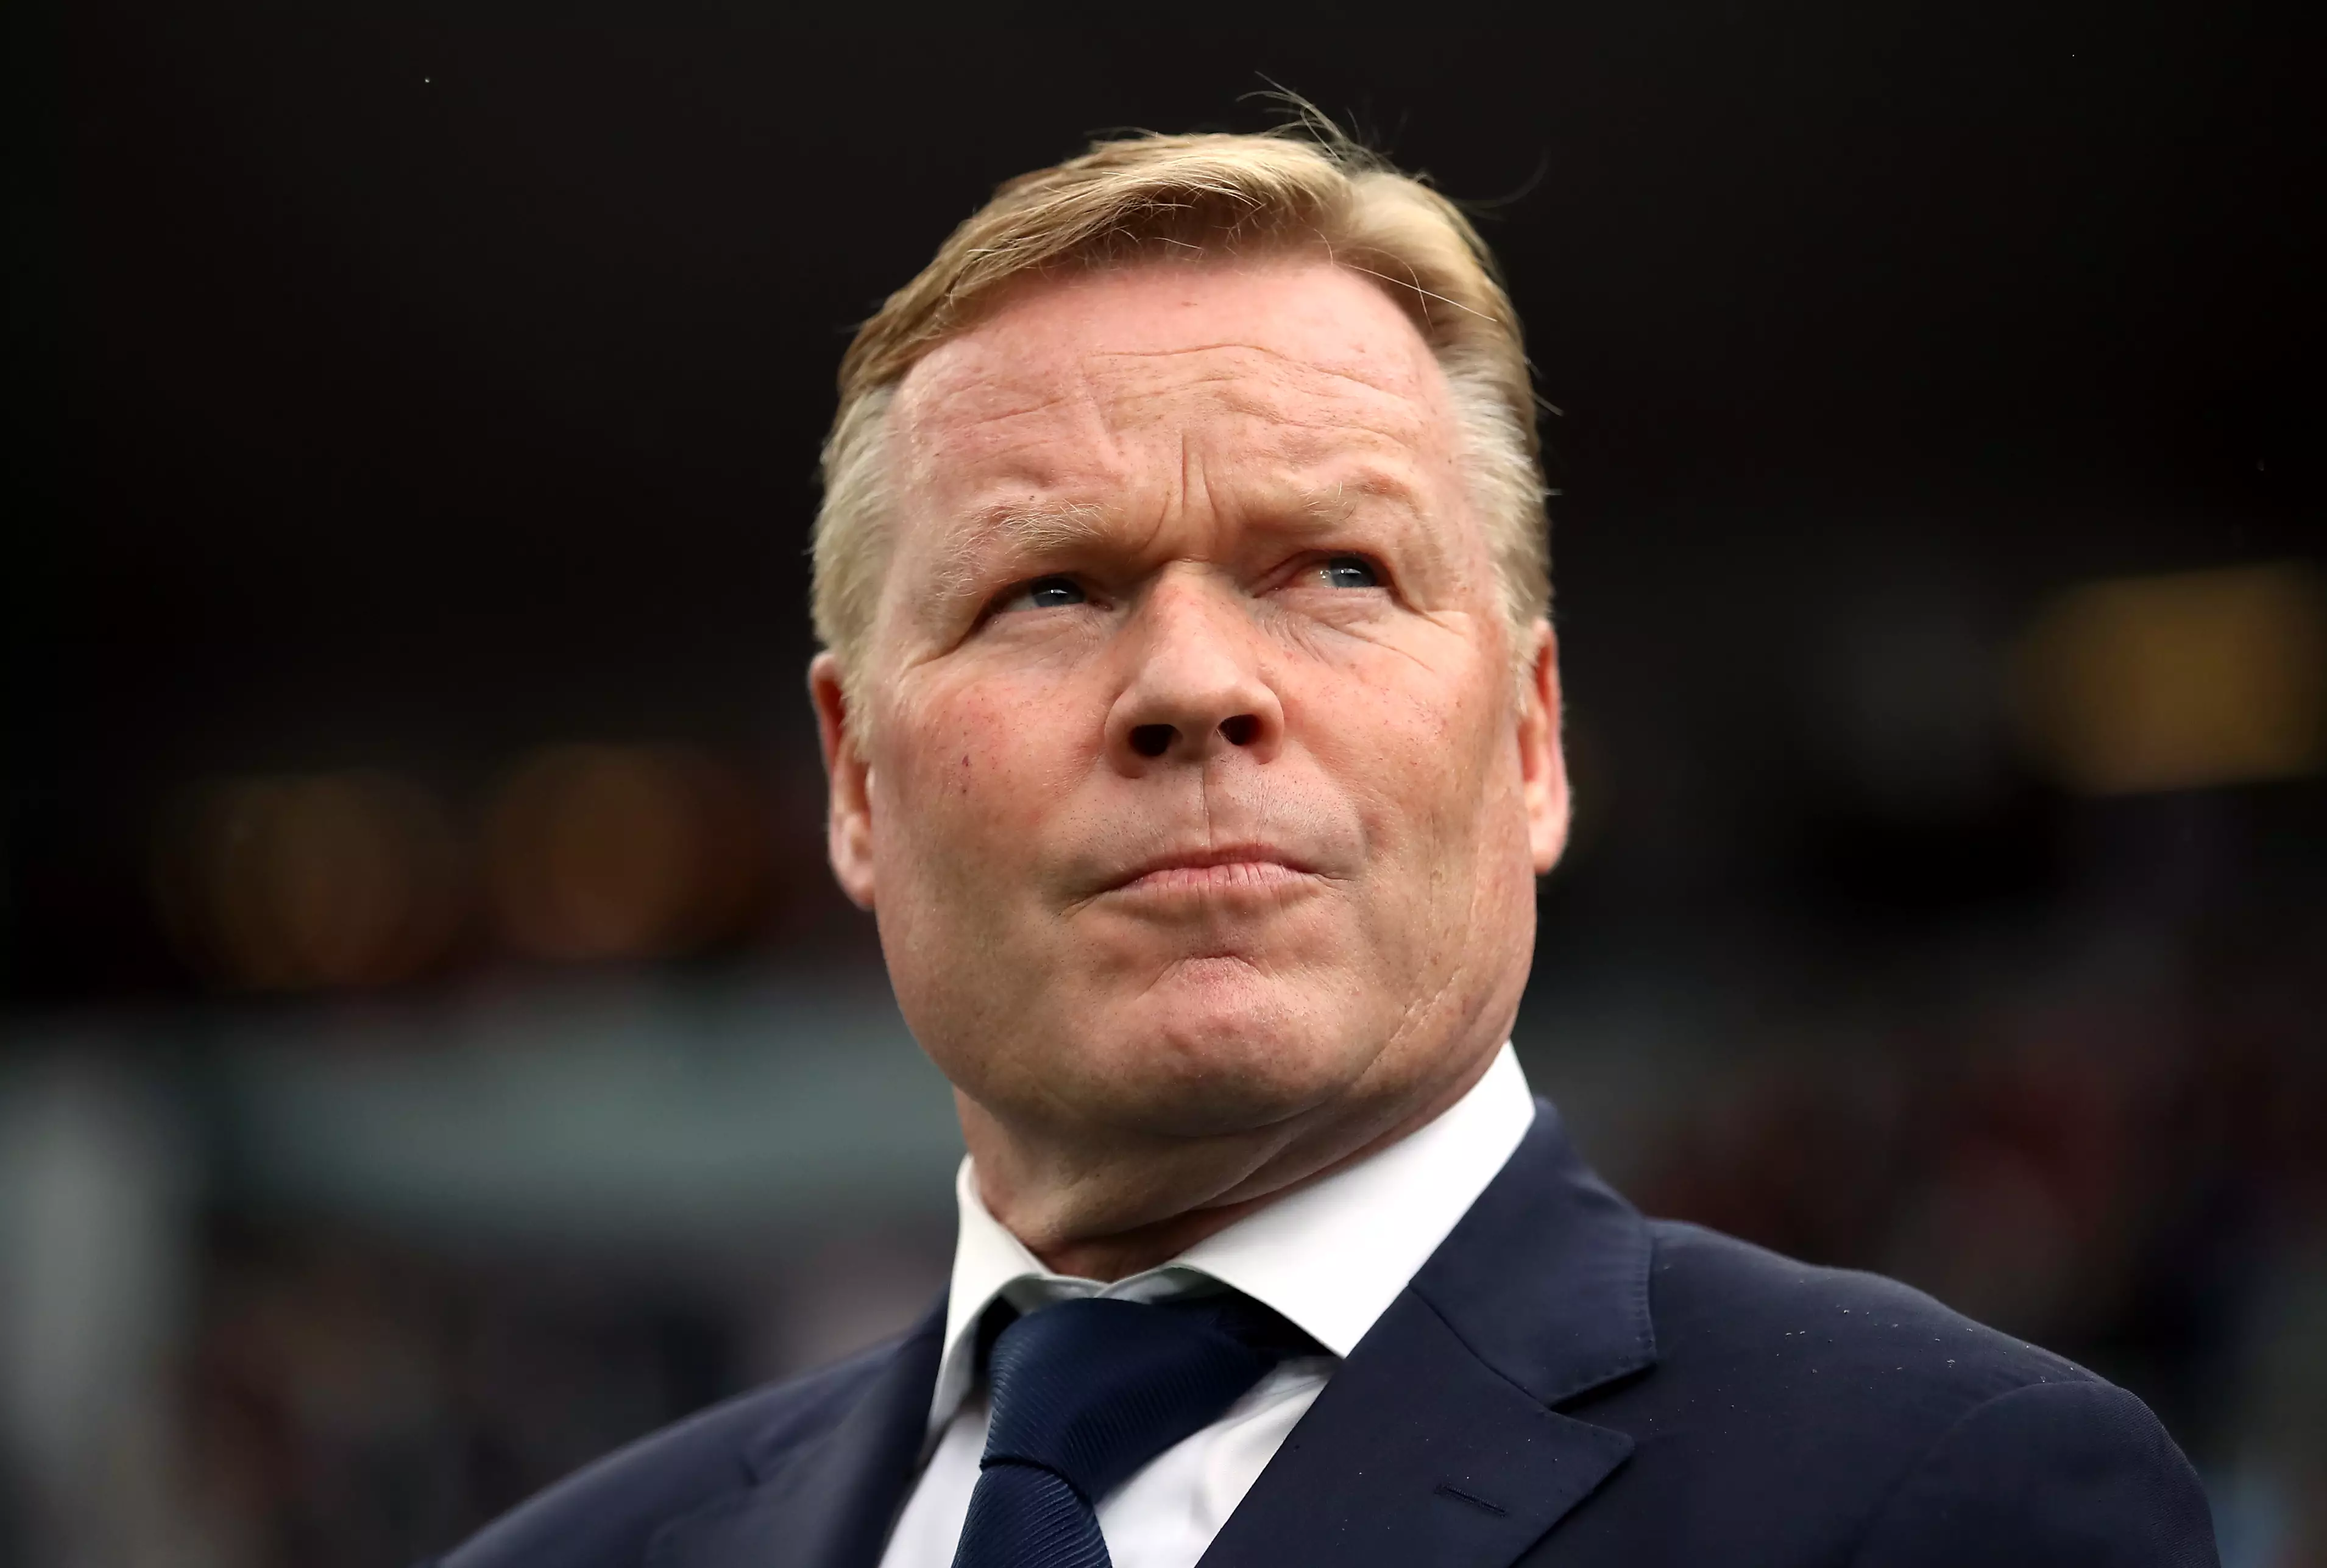 Koeman is expected to become Barcelona boss soon. Image: PA Images